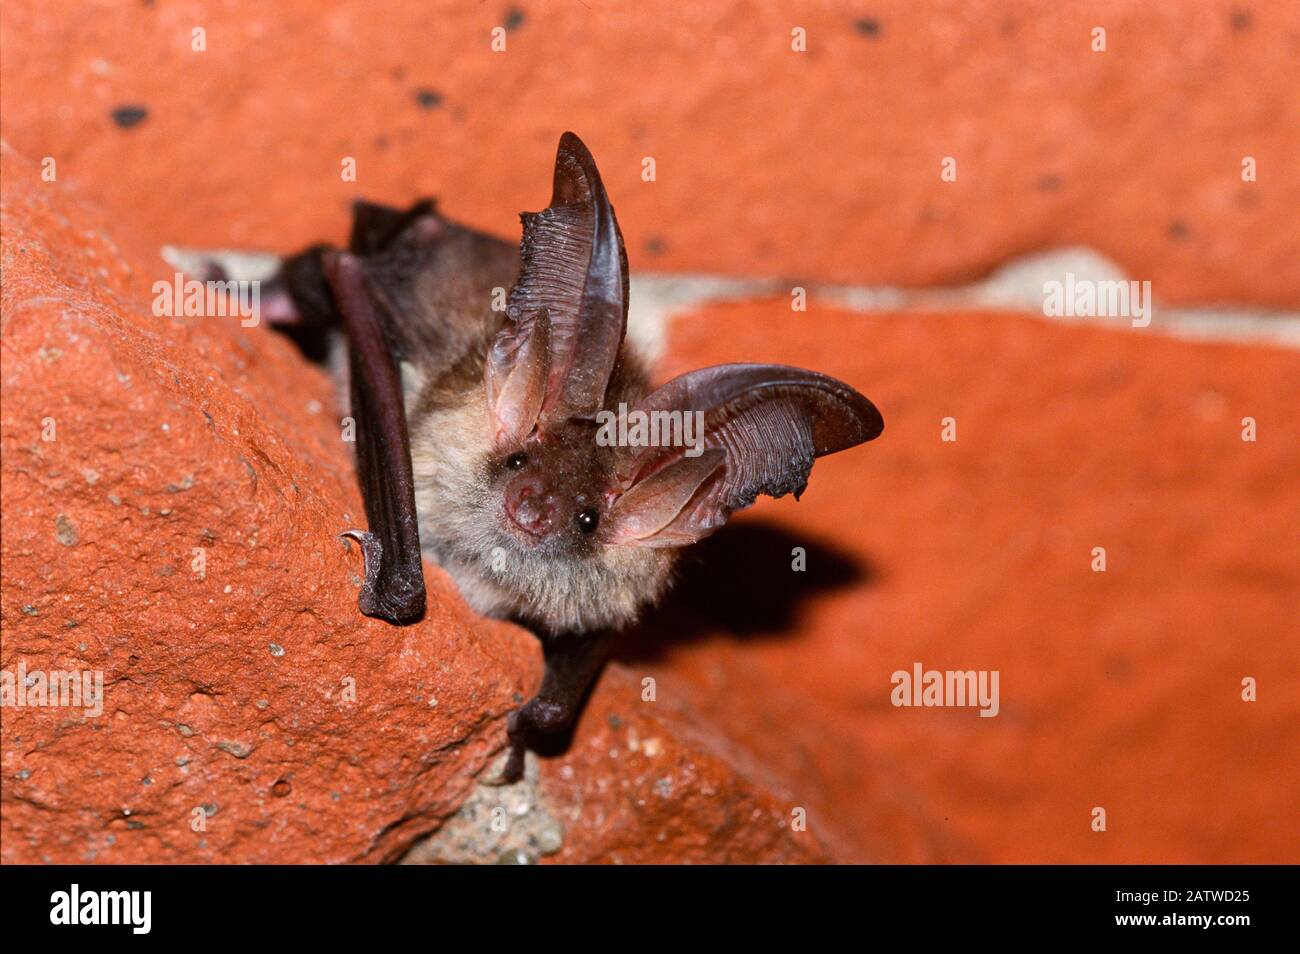 Brown Long-eared Bat, Common Long-eared Bat (Plecotus auritus). Adult clinging to a wall. Germany Stock Photo